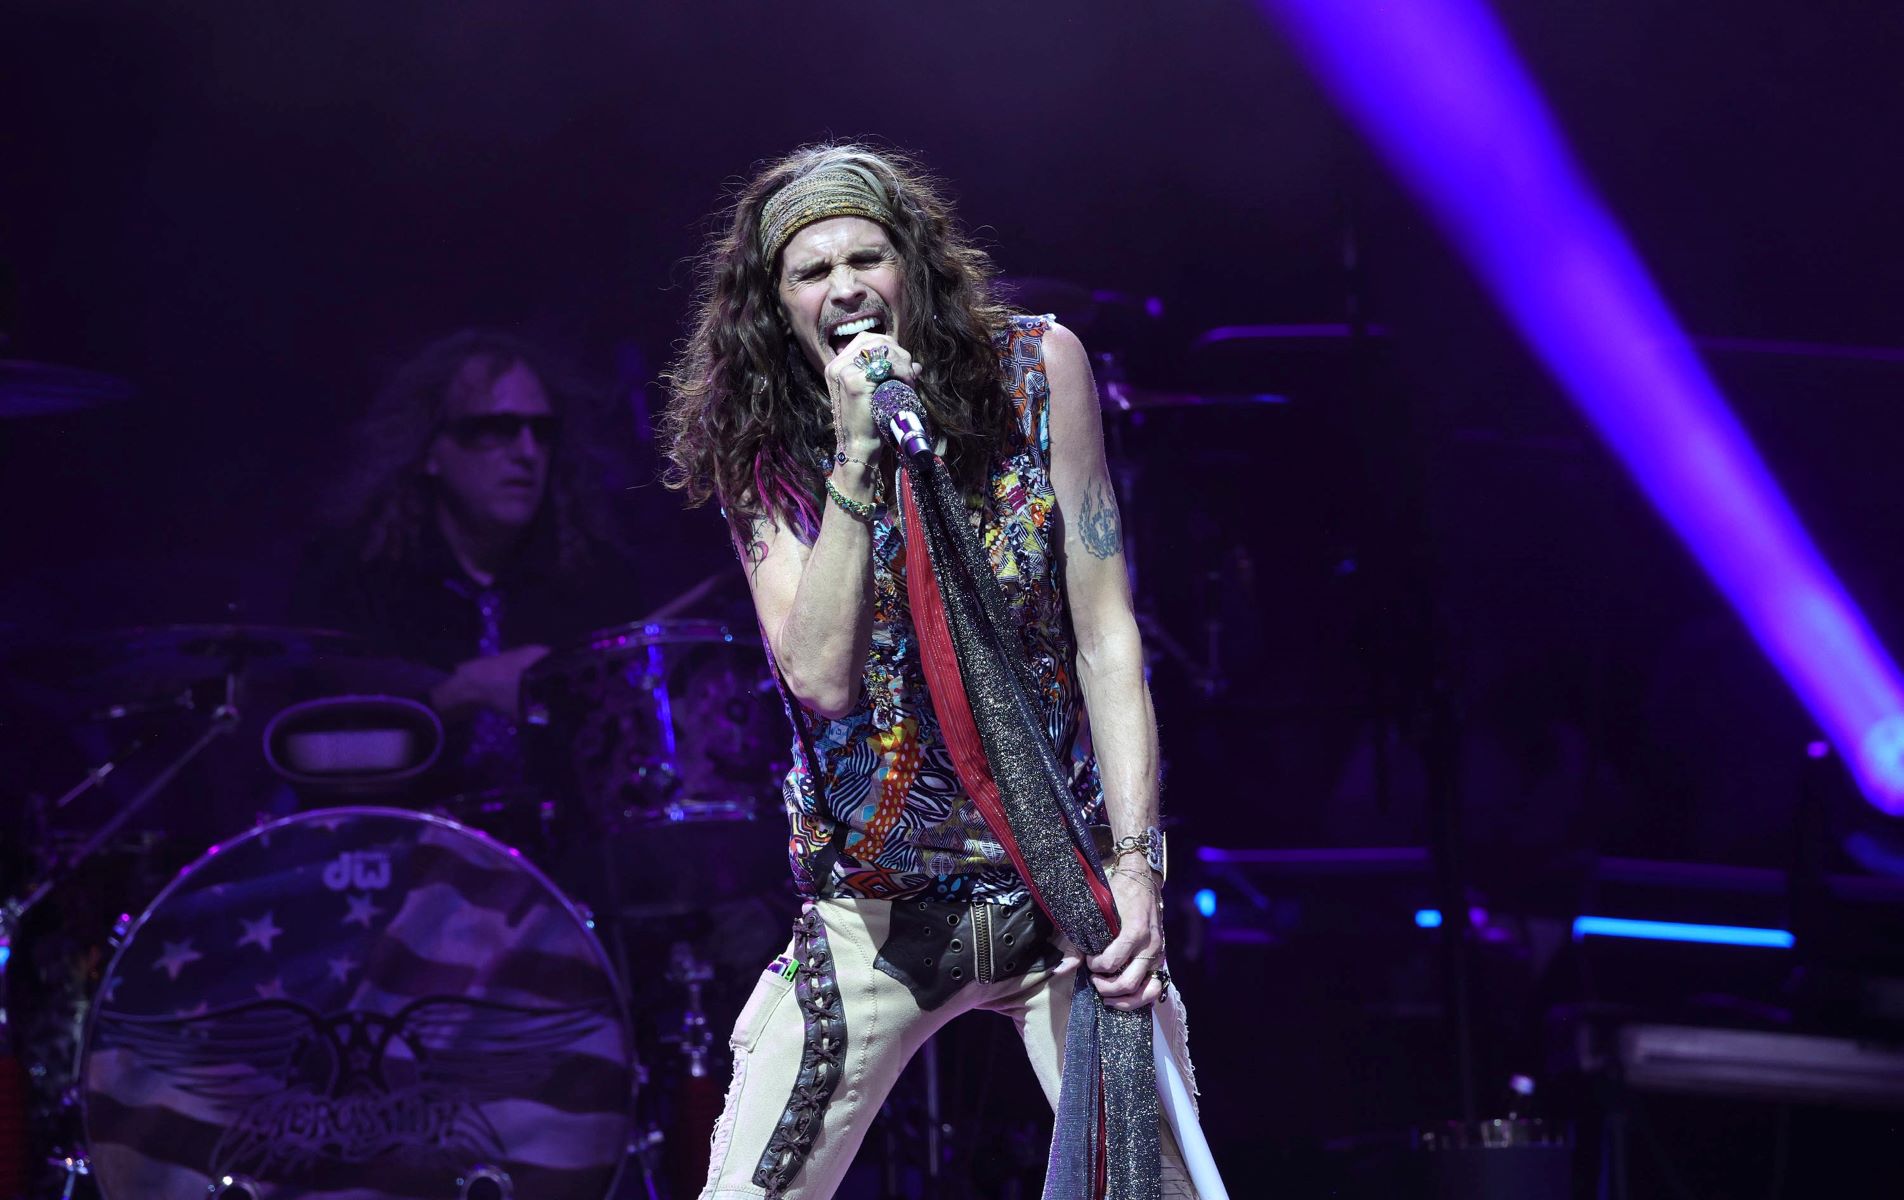 Steven Tyler’s Vocal Cords Are “Mangled” But Will Sing Again